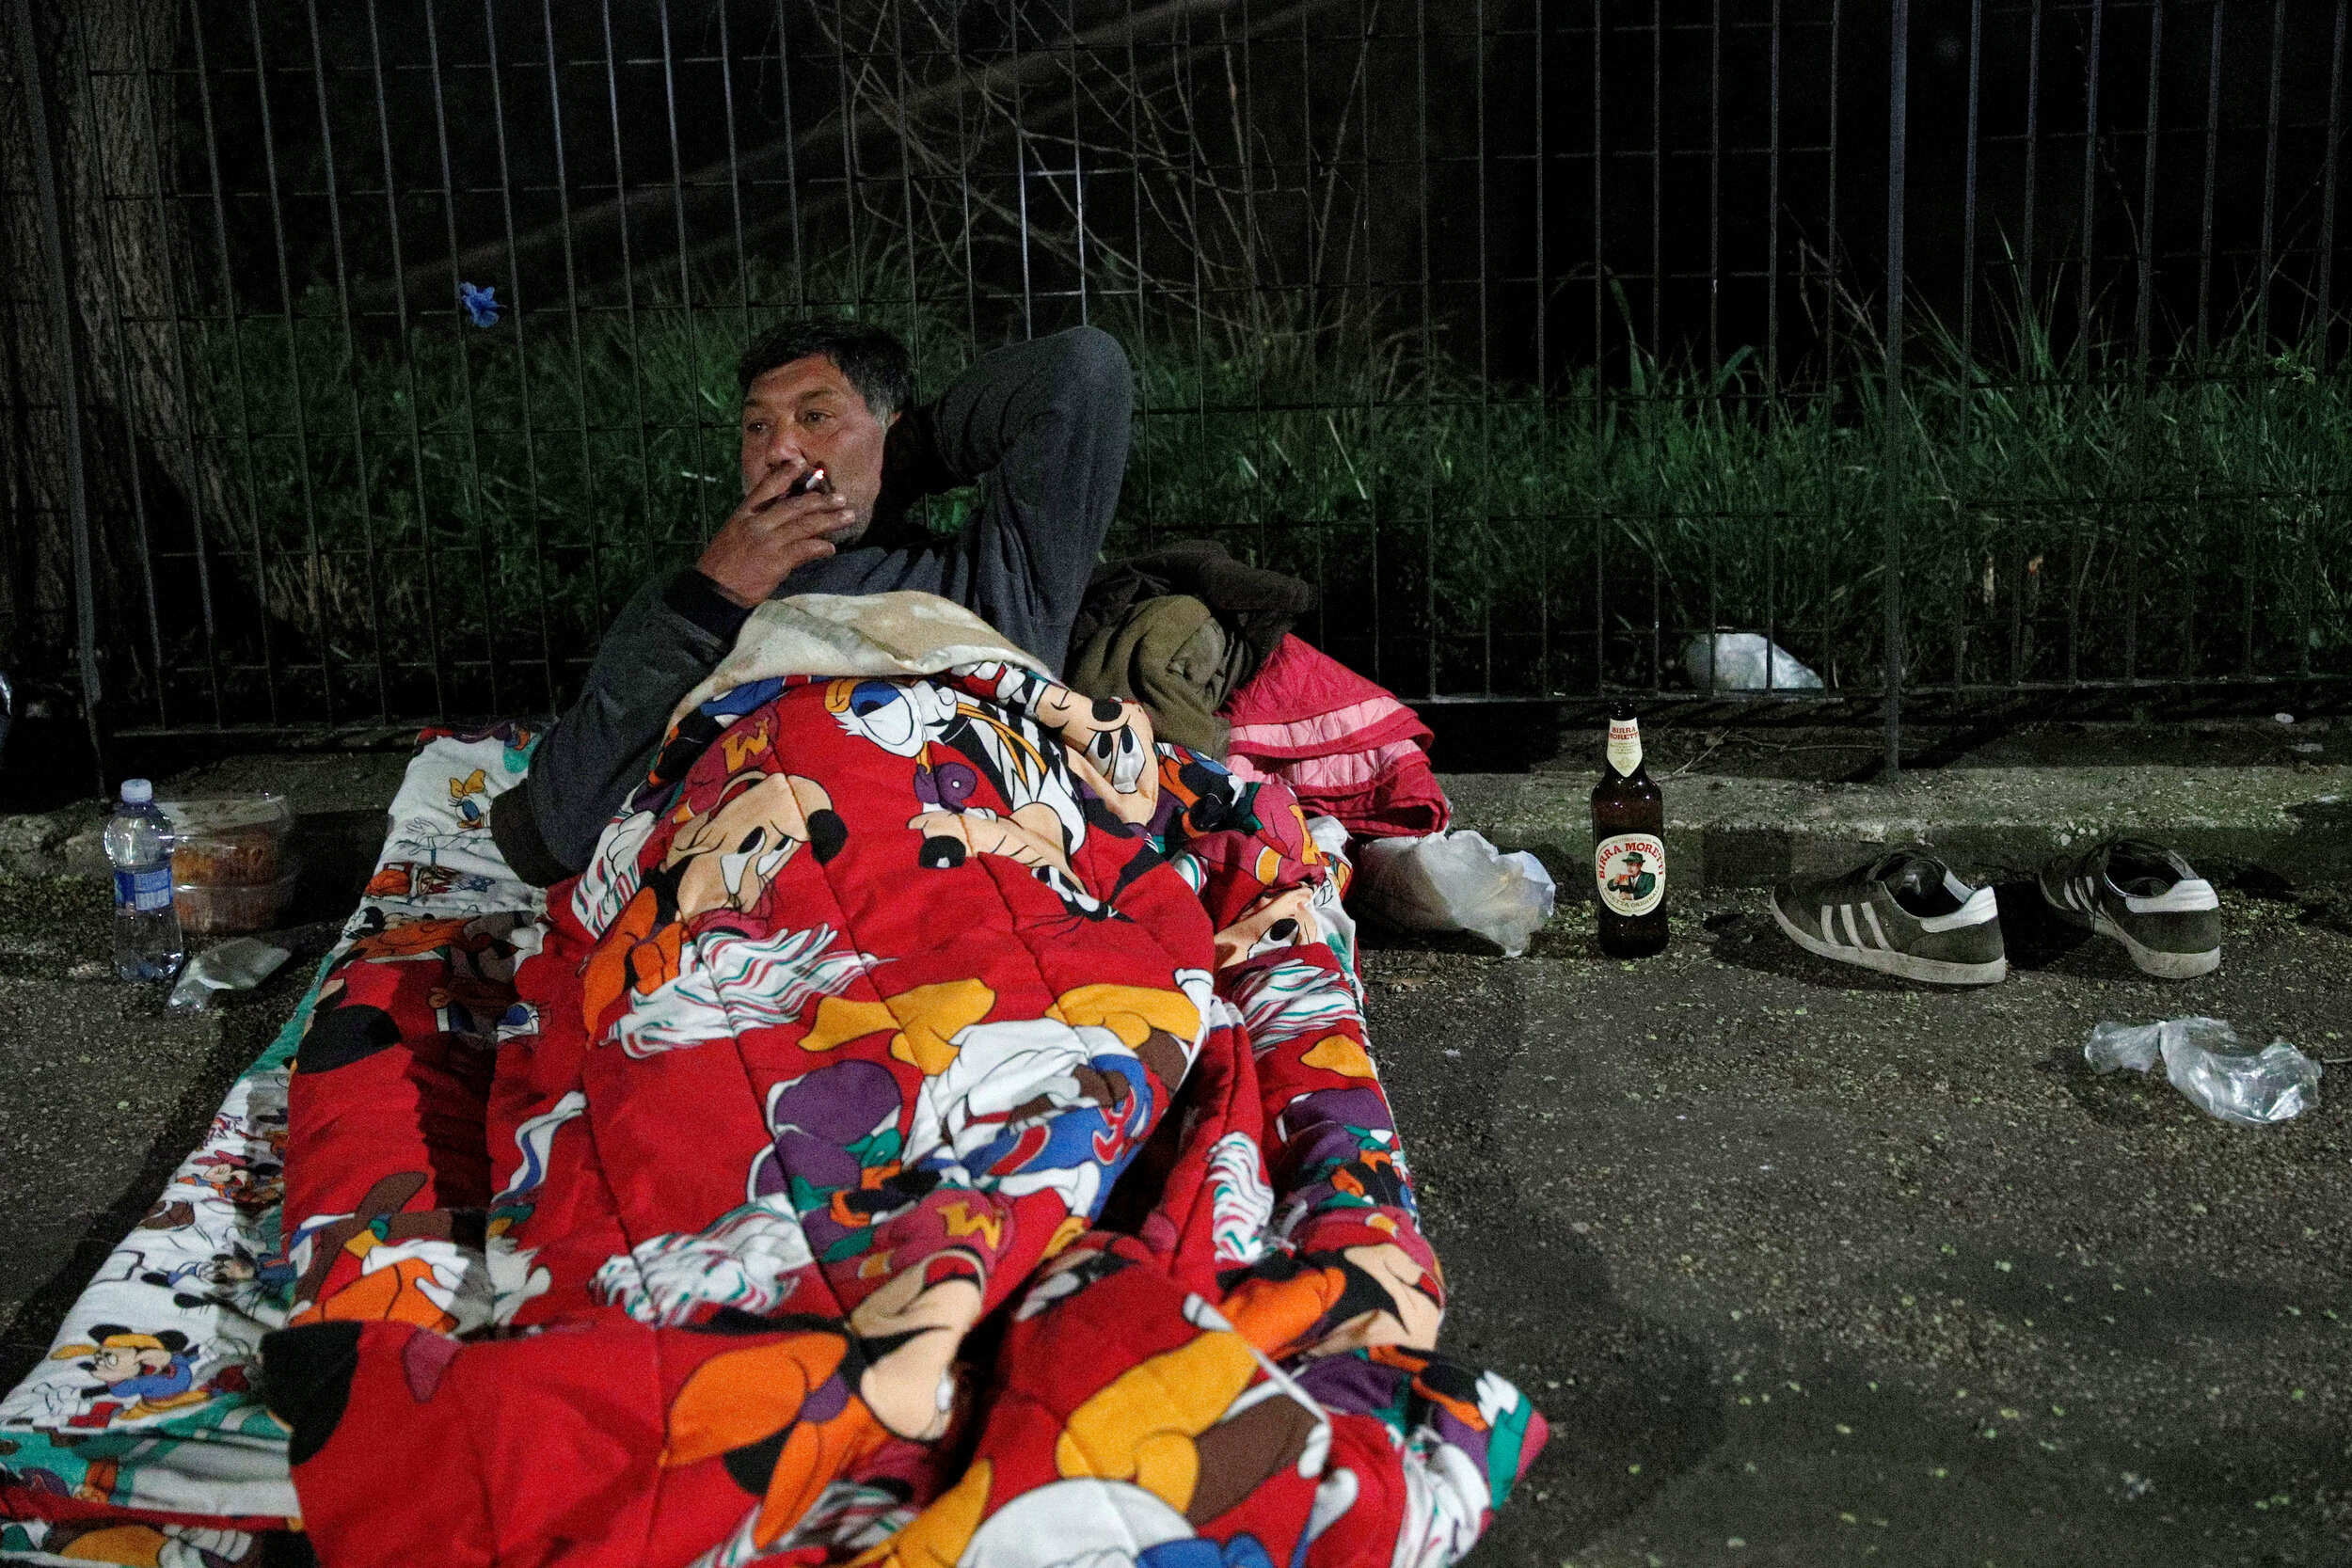  A homeless person smokes a cigarette as he lies on a pavement in Rome, Italy, March 17, 2020. Since the coronavirus crisis, Red Cross workers have been increasing their daily activities to meet the growing needs of the homeless in Rome.  